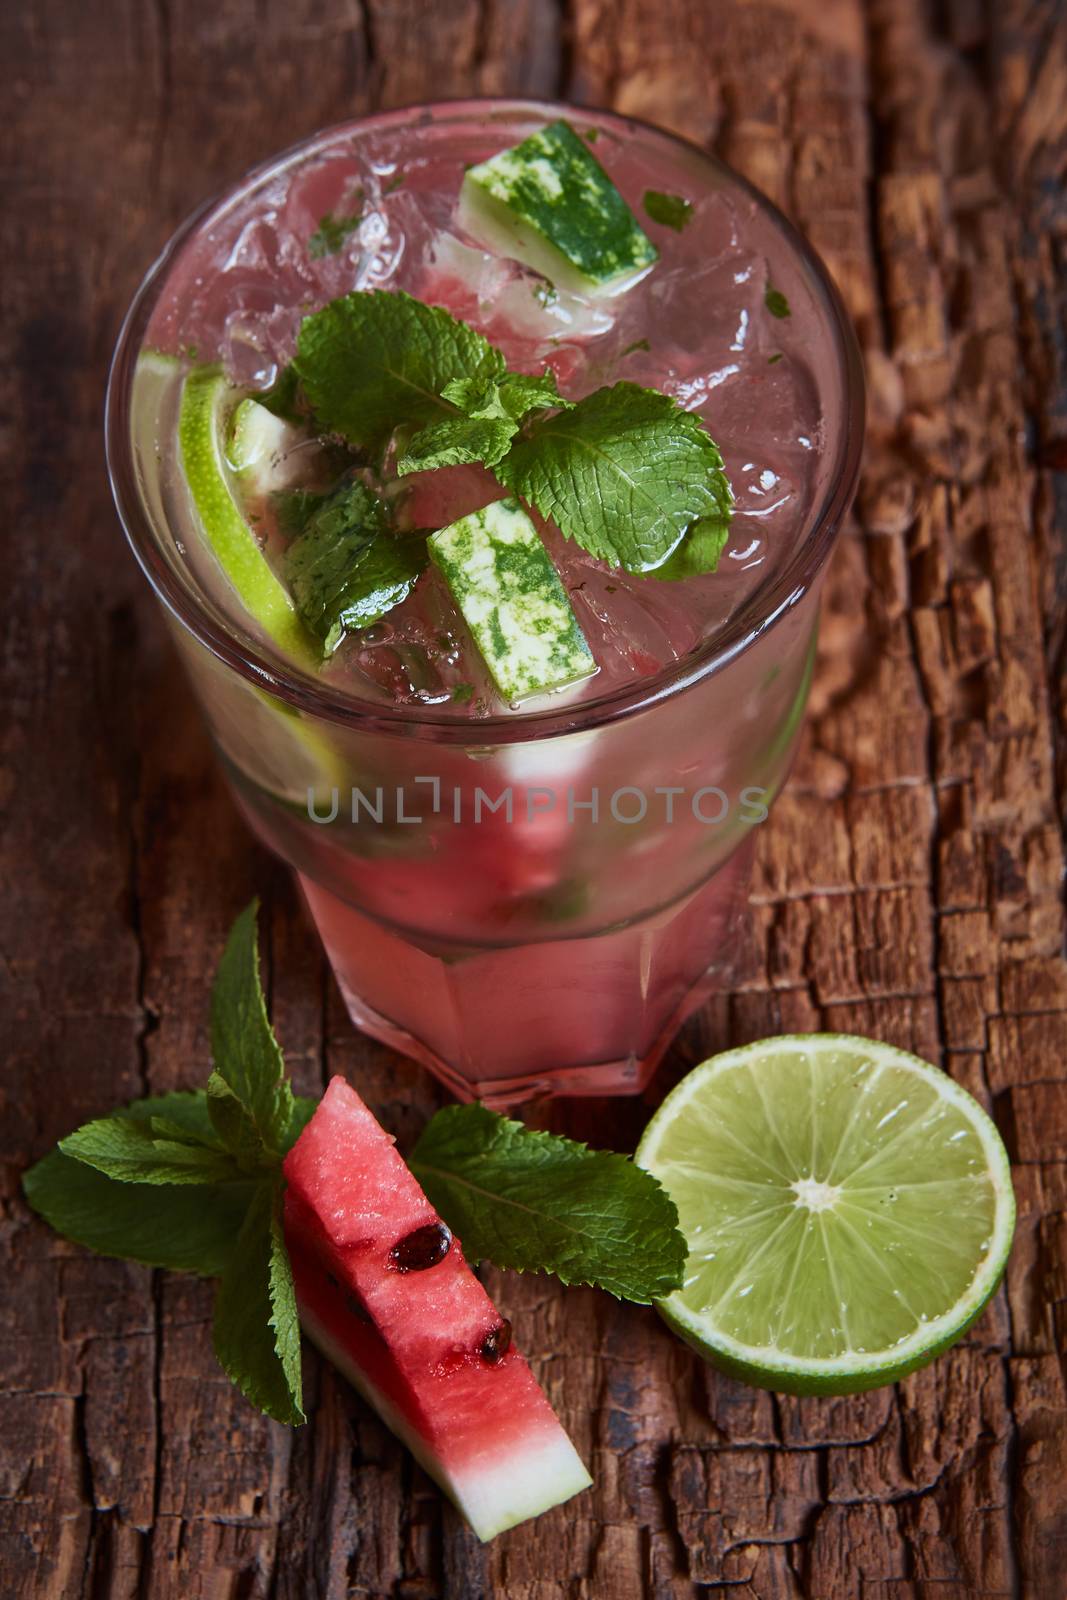 Homemade watermelon lemonade with mint and lime in glasses and slices of watermelon